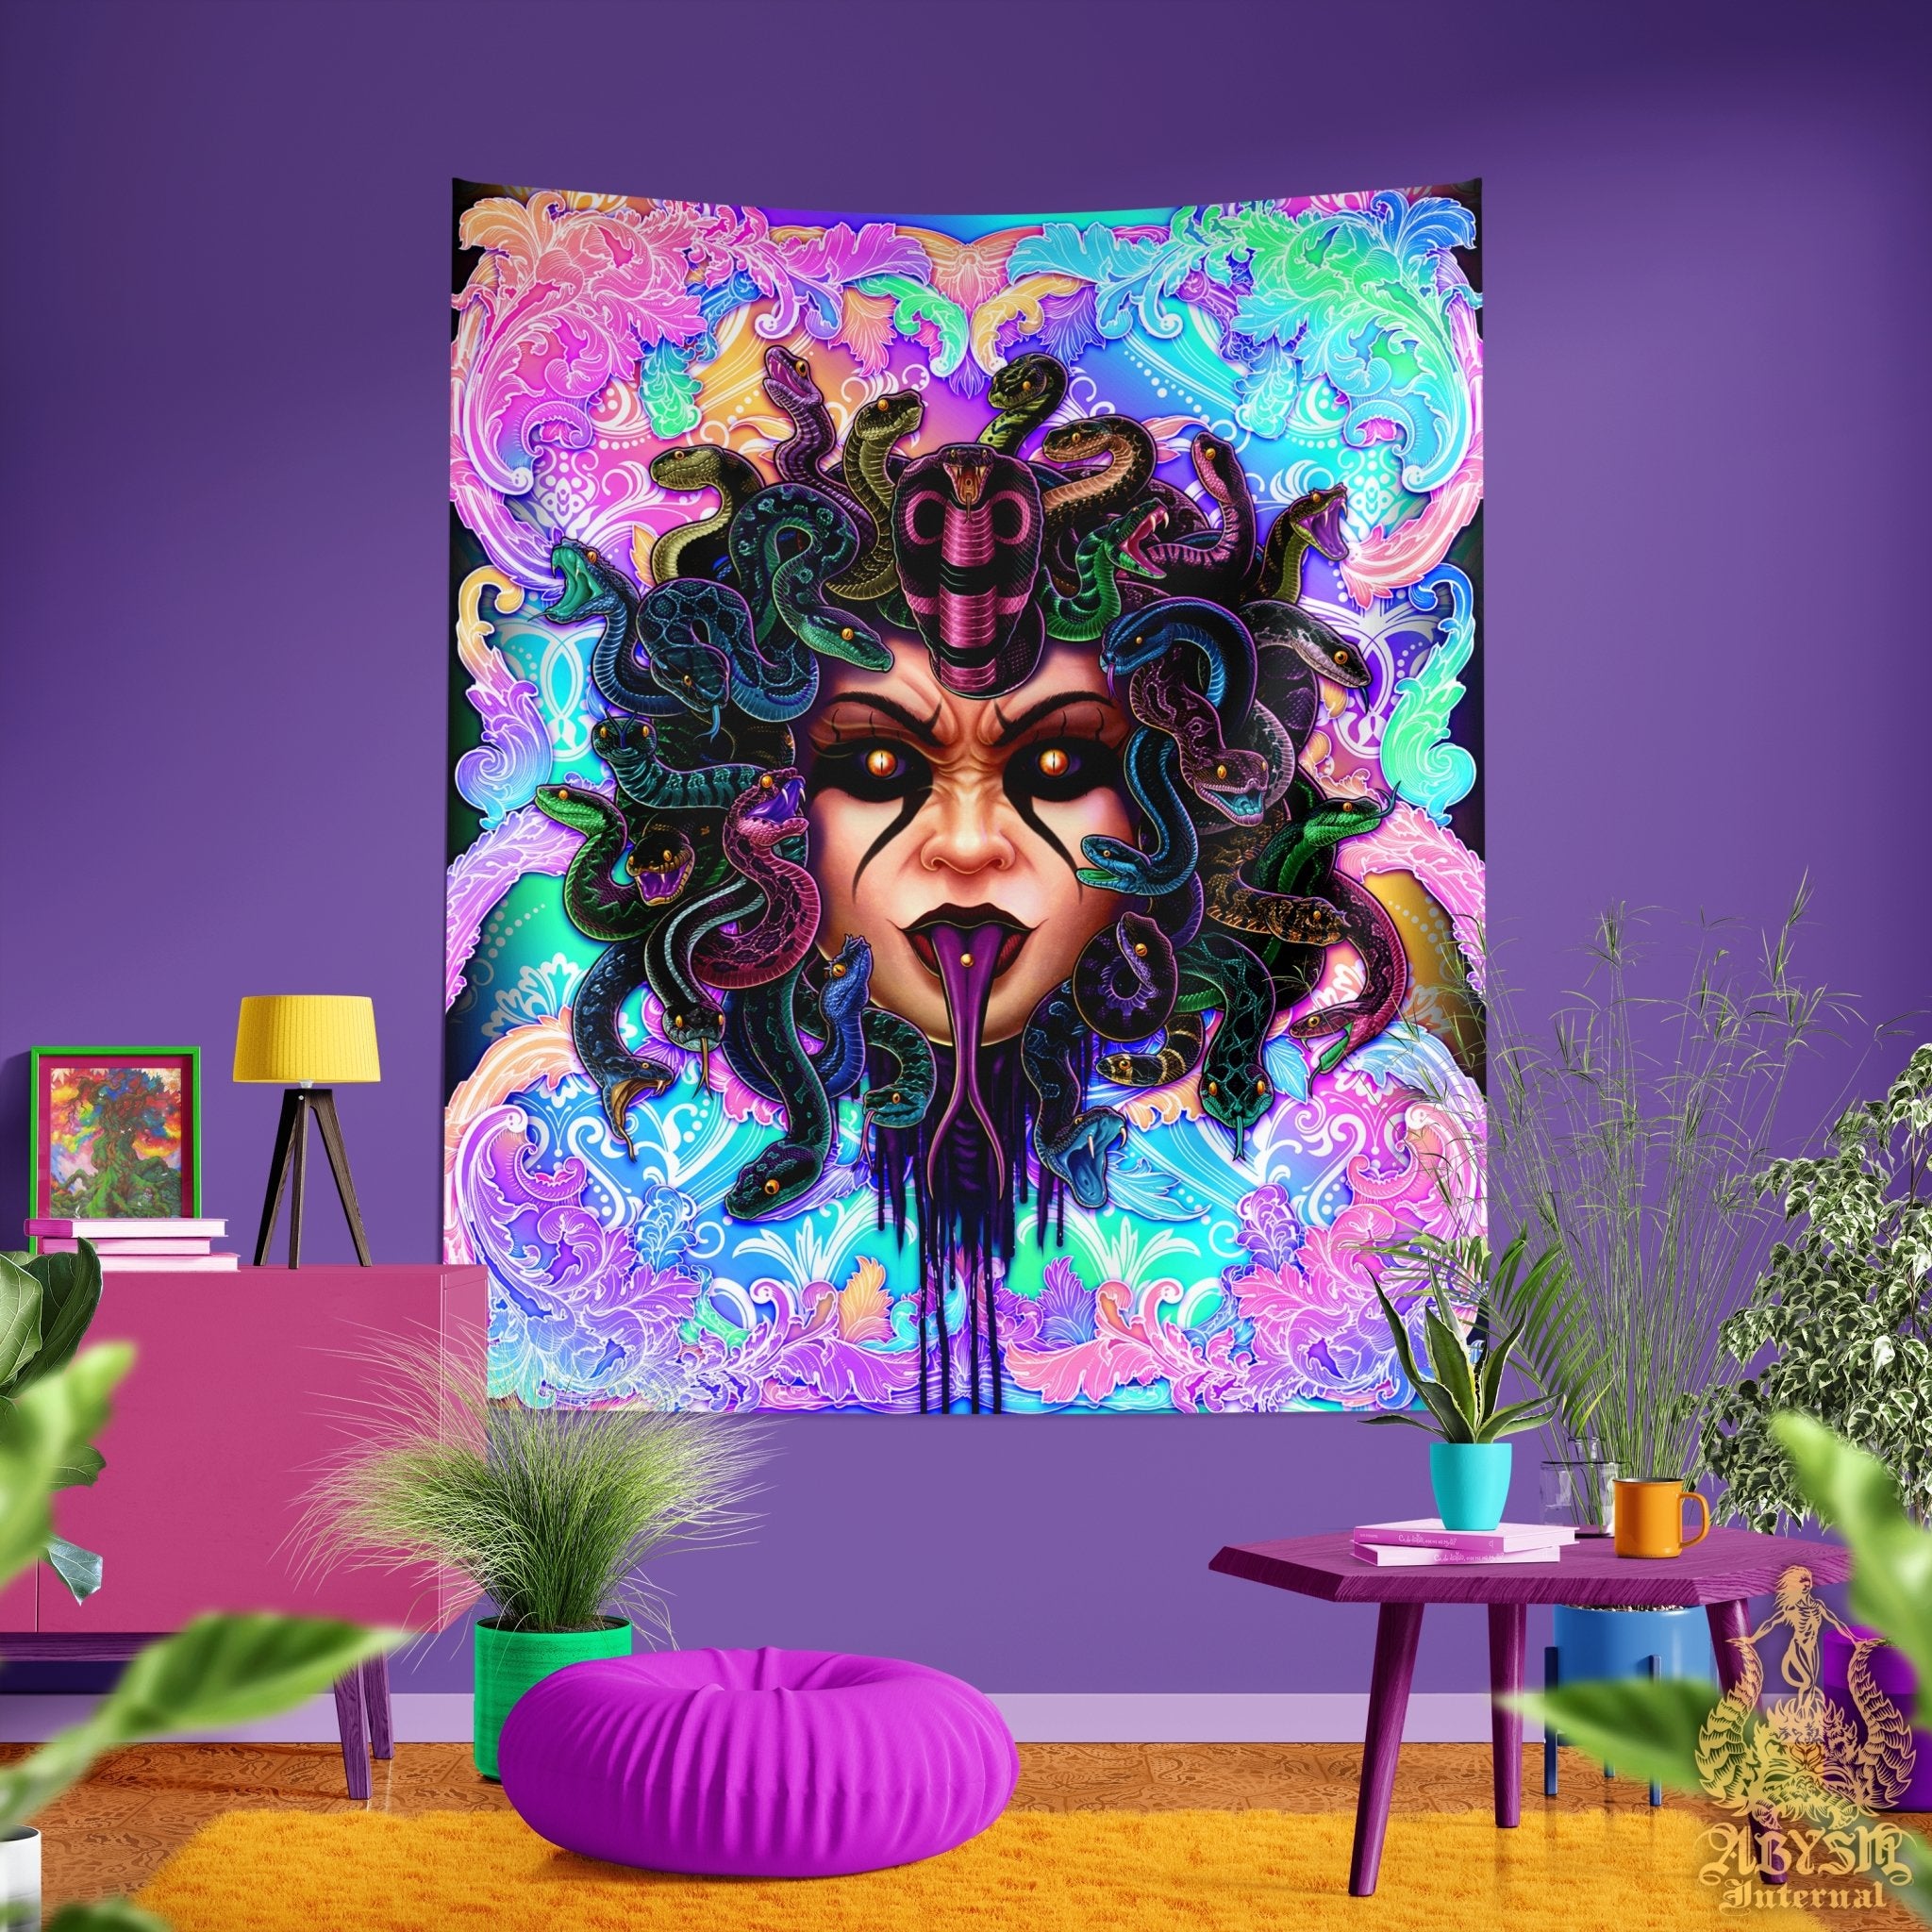 Psychedelic Medusa Tapestry, Holographic Wall Hanging, Aesthetic Home Decor, Art Print, Eclectic and Funky - Pastel Punk Black, 3 Faces - Abysm Internal